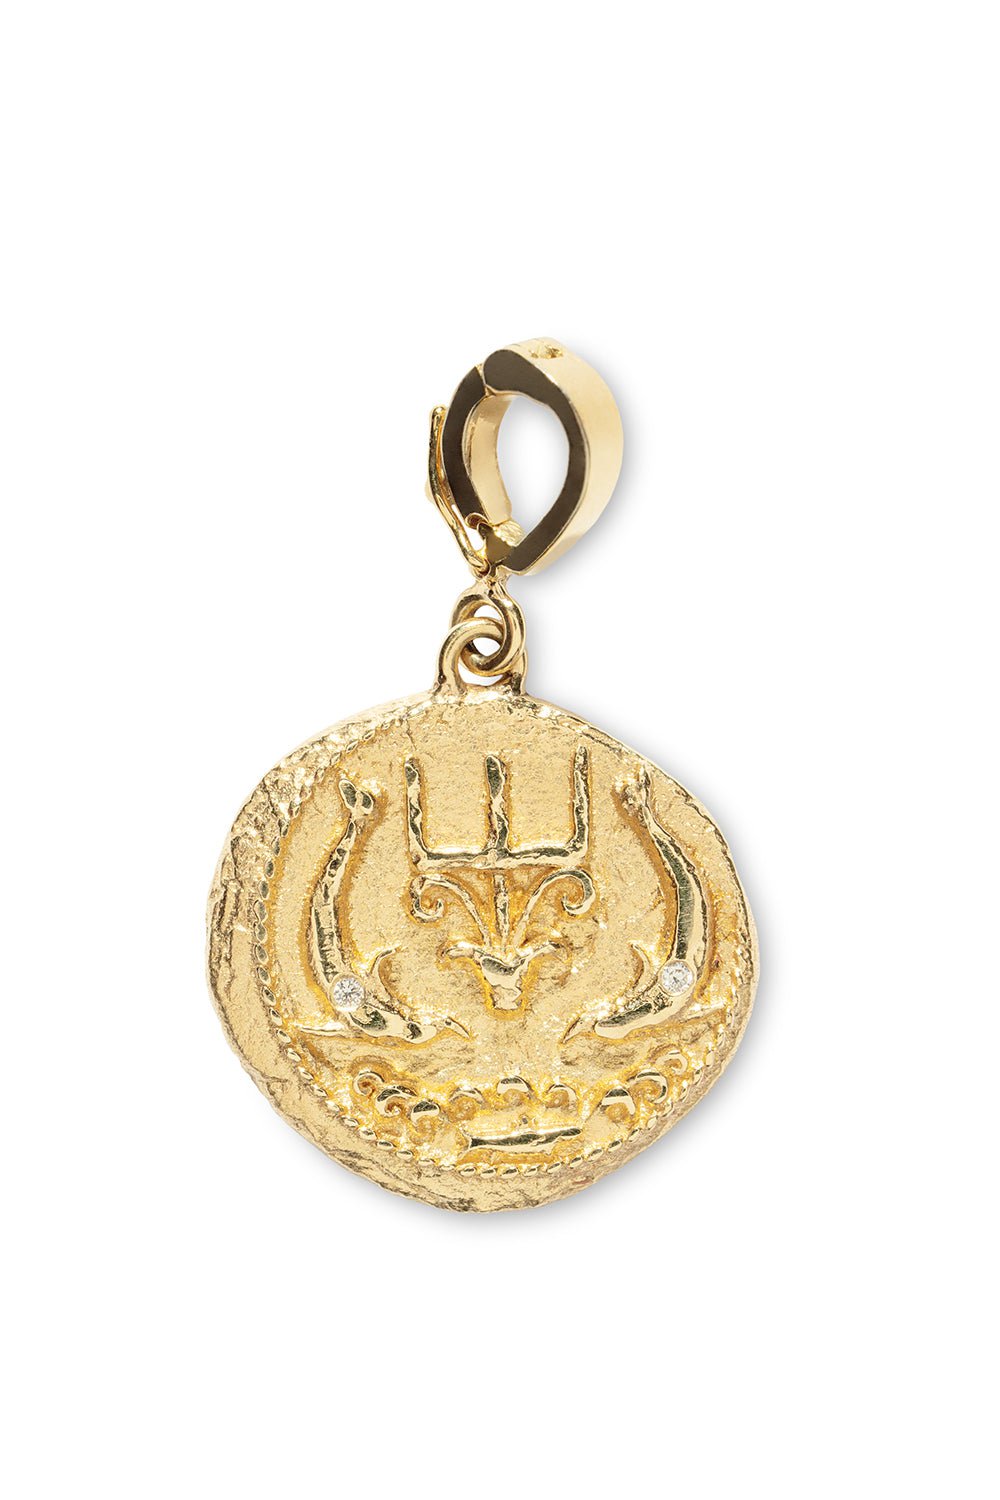 AZLEE-Of the Sea Small Coin-YELLOW GOLD